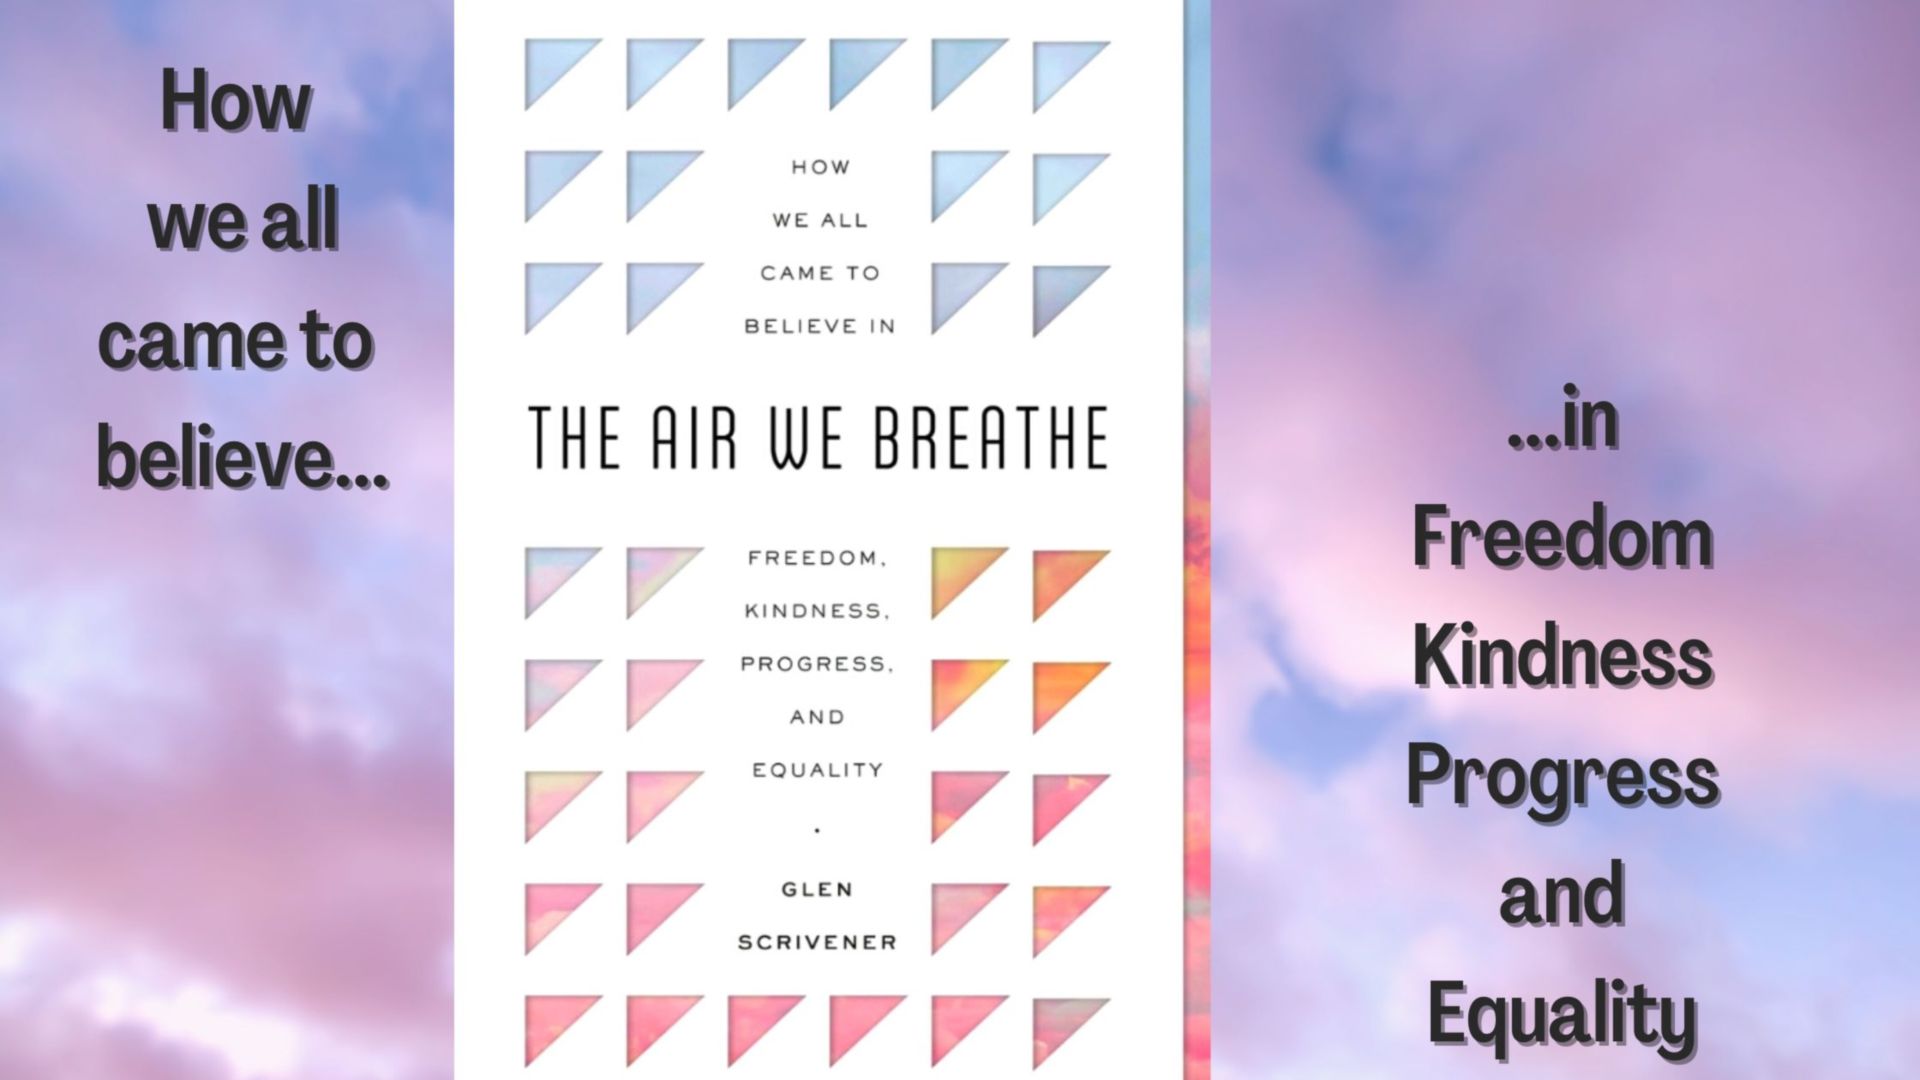 A review on the book 'The Air We Breath' by Glen Scrivener